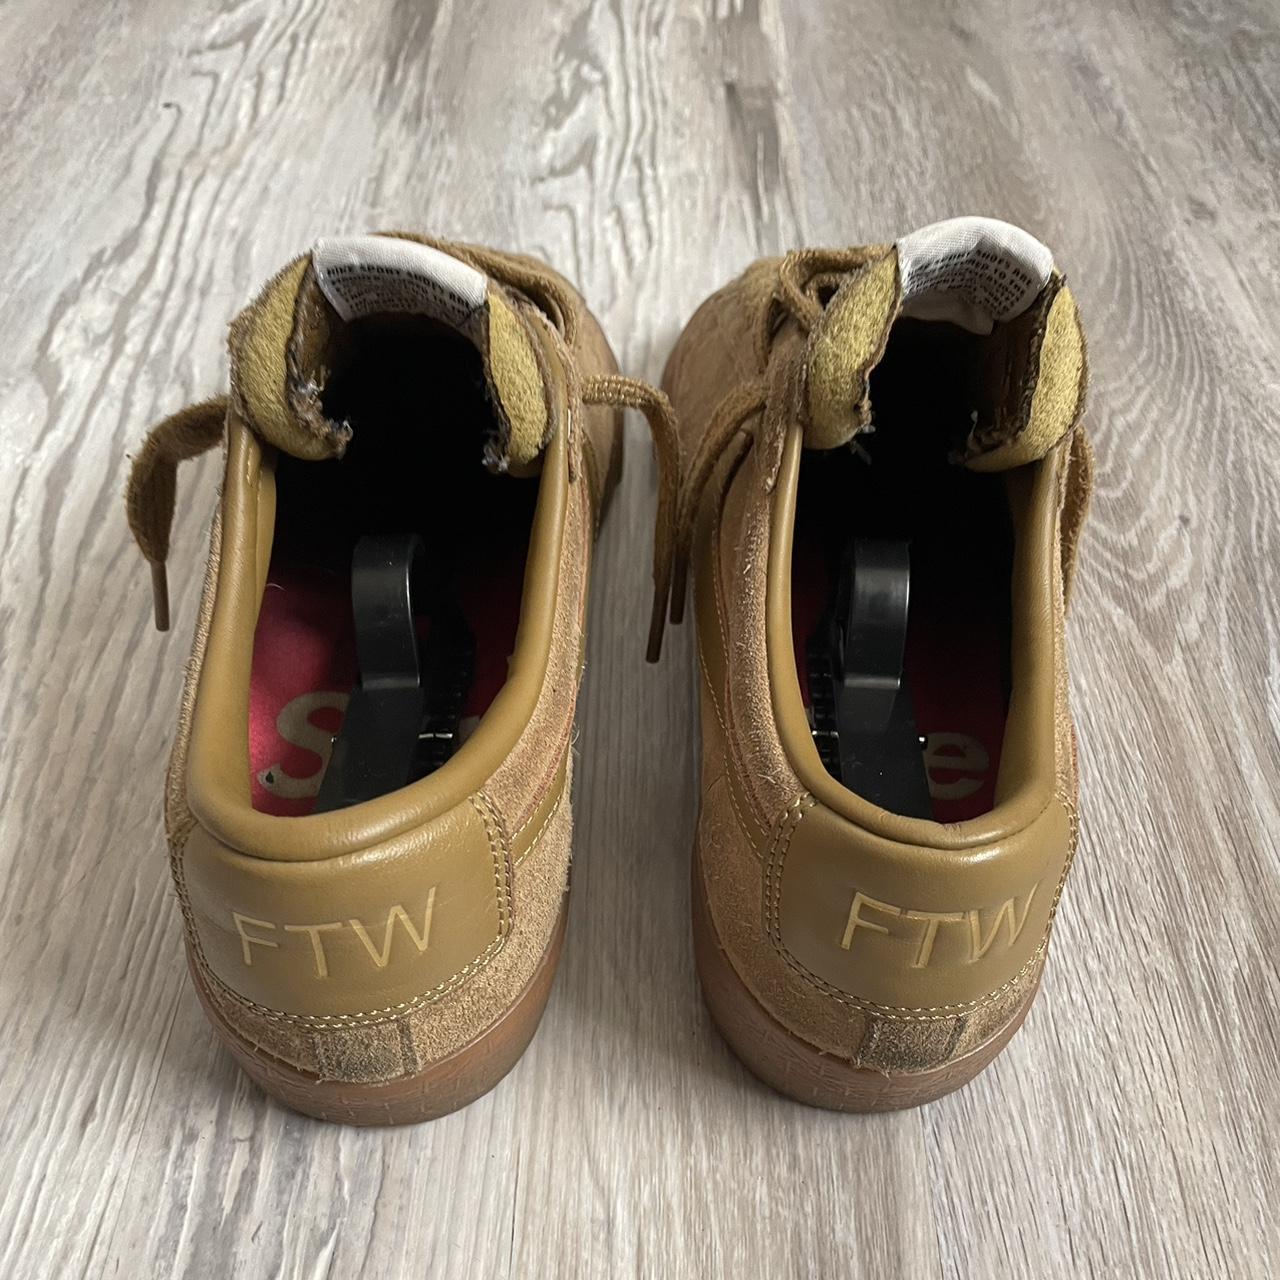 Supreme Men's Tan and Brown Trainers (2)